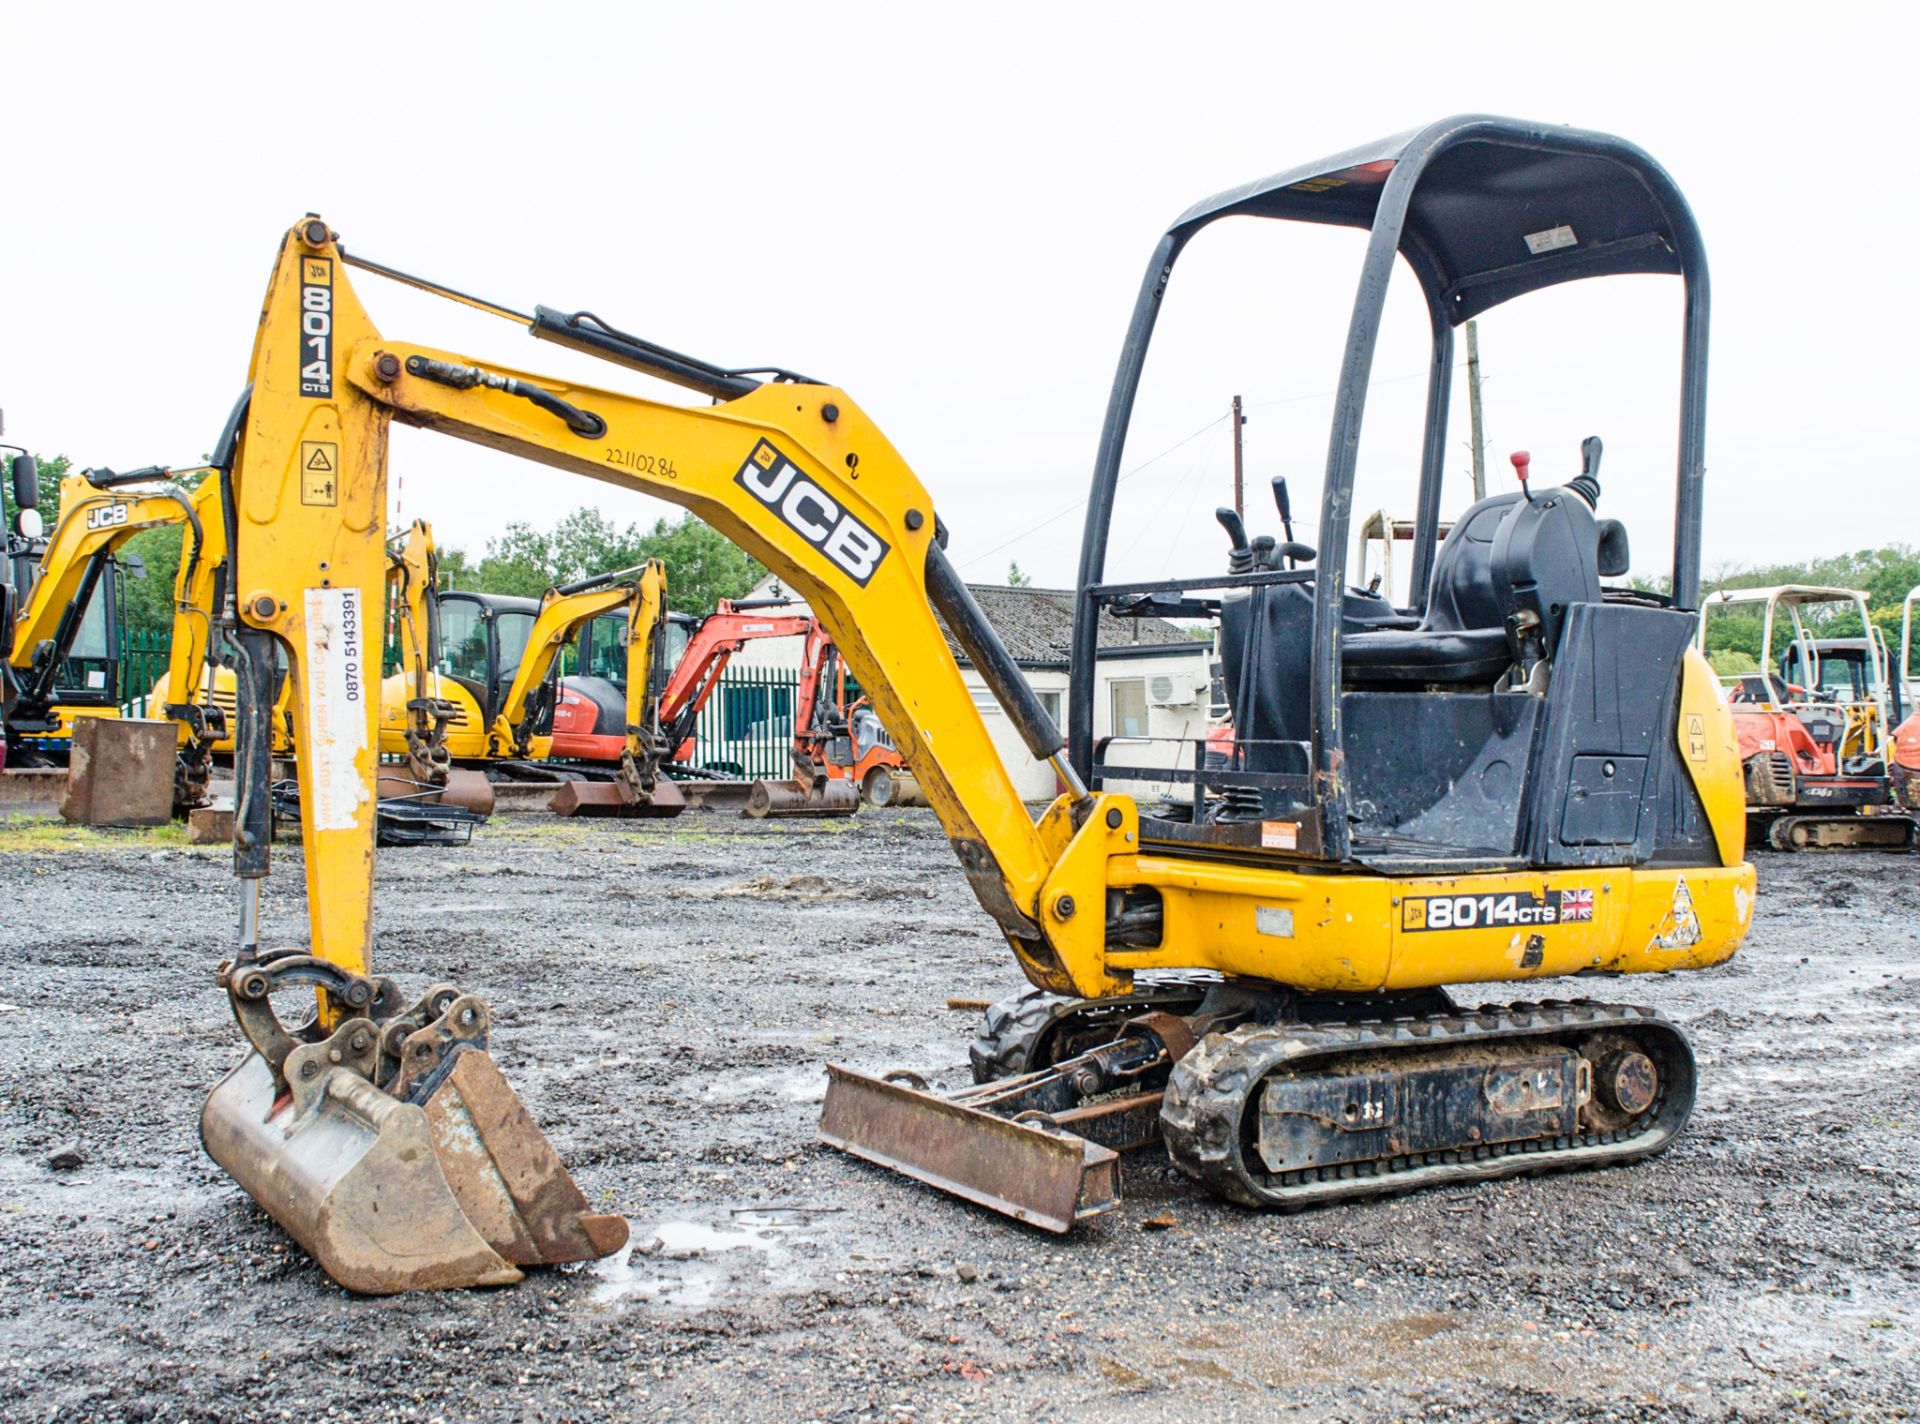 JCB 8014 CTS 1.5 tonne rubber tracked mini excavator Year: 2014 S/N: 2070464 Recorded Hours: 1102